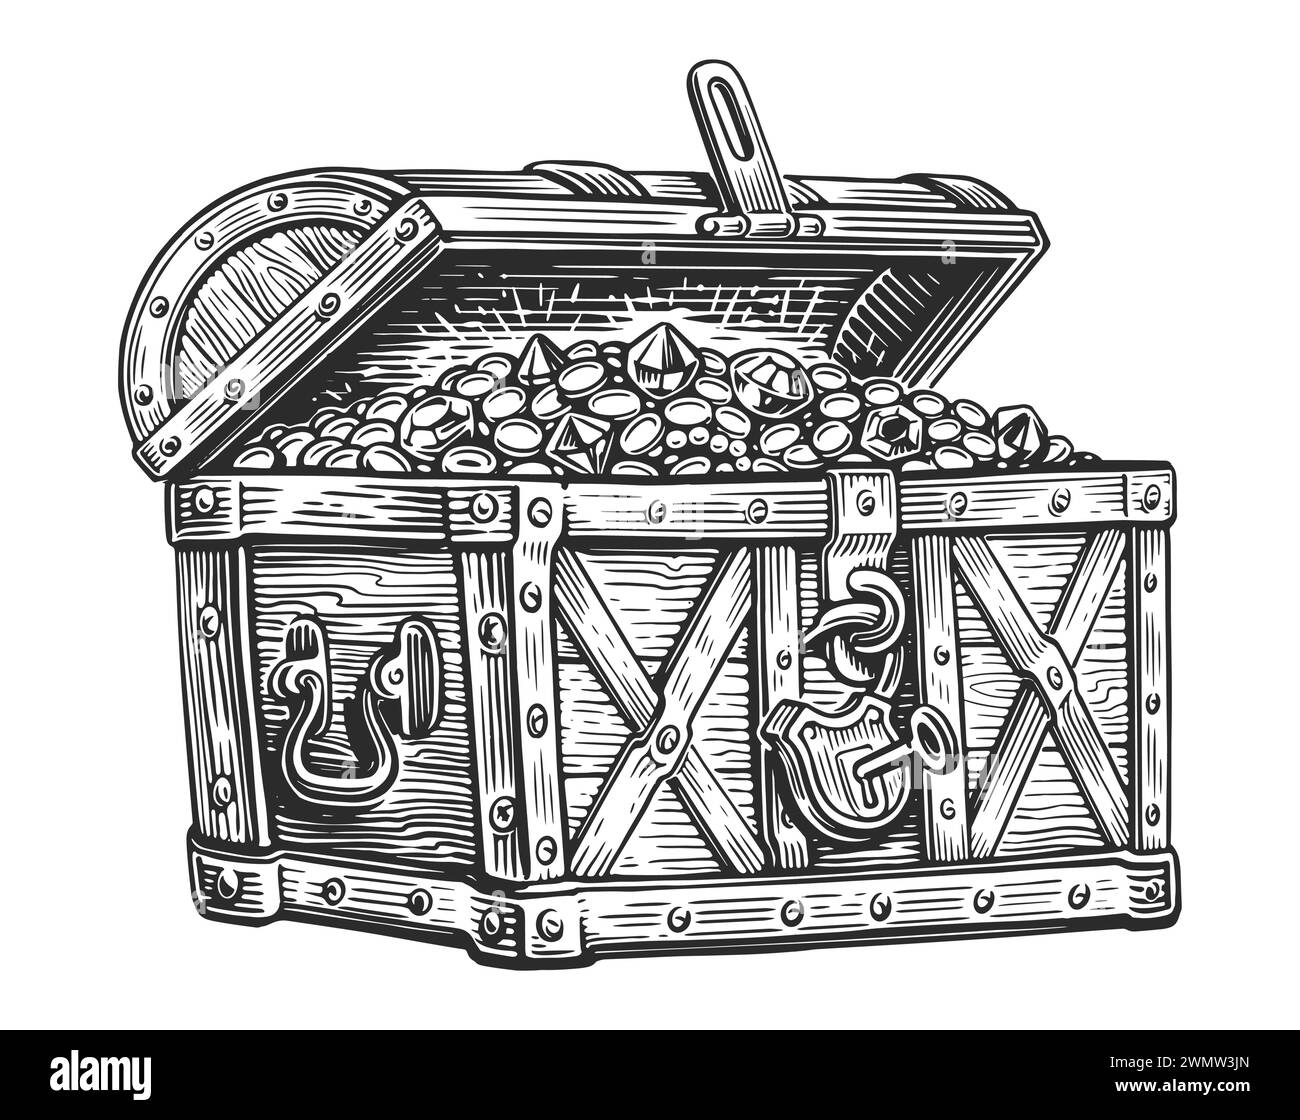 Pirate chest full of treasures of gold coins and precious stones. Hand drawn vector illustration in engraving style Stock Vector